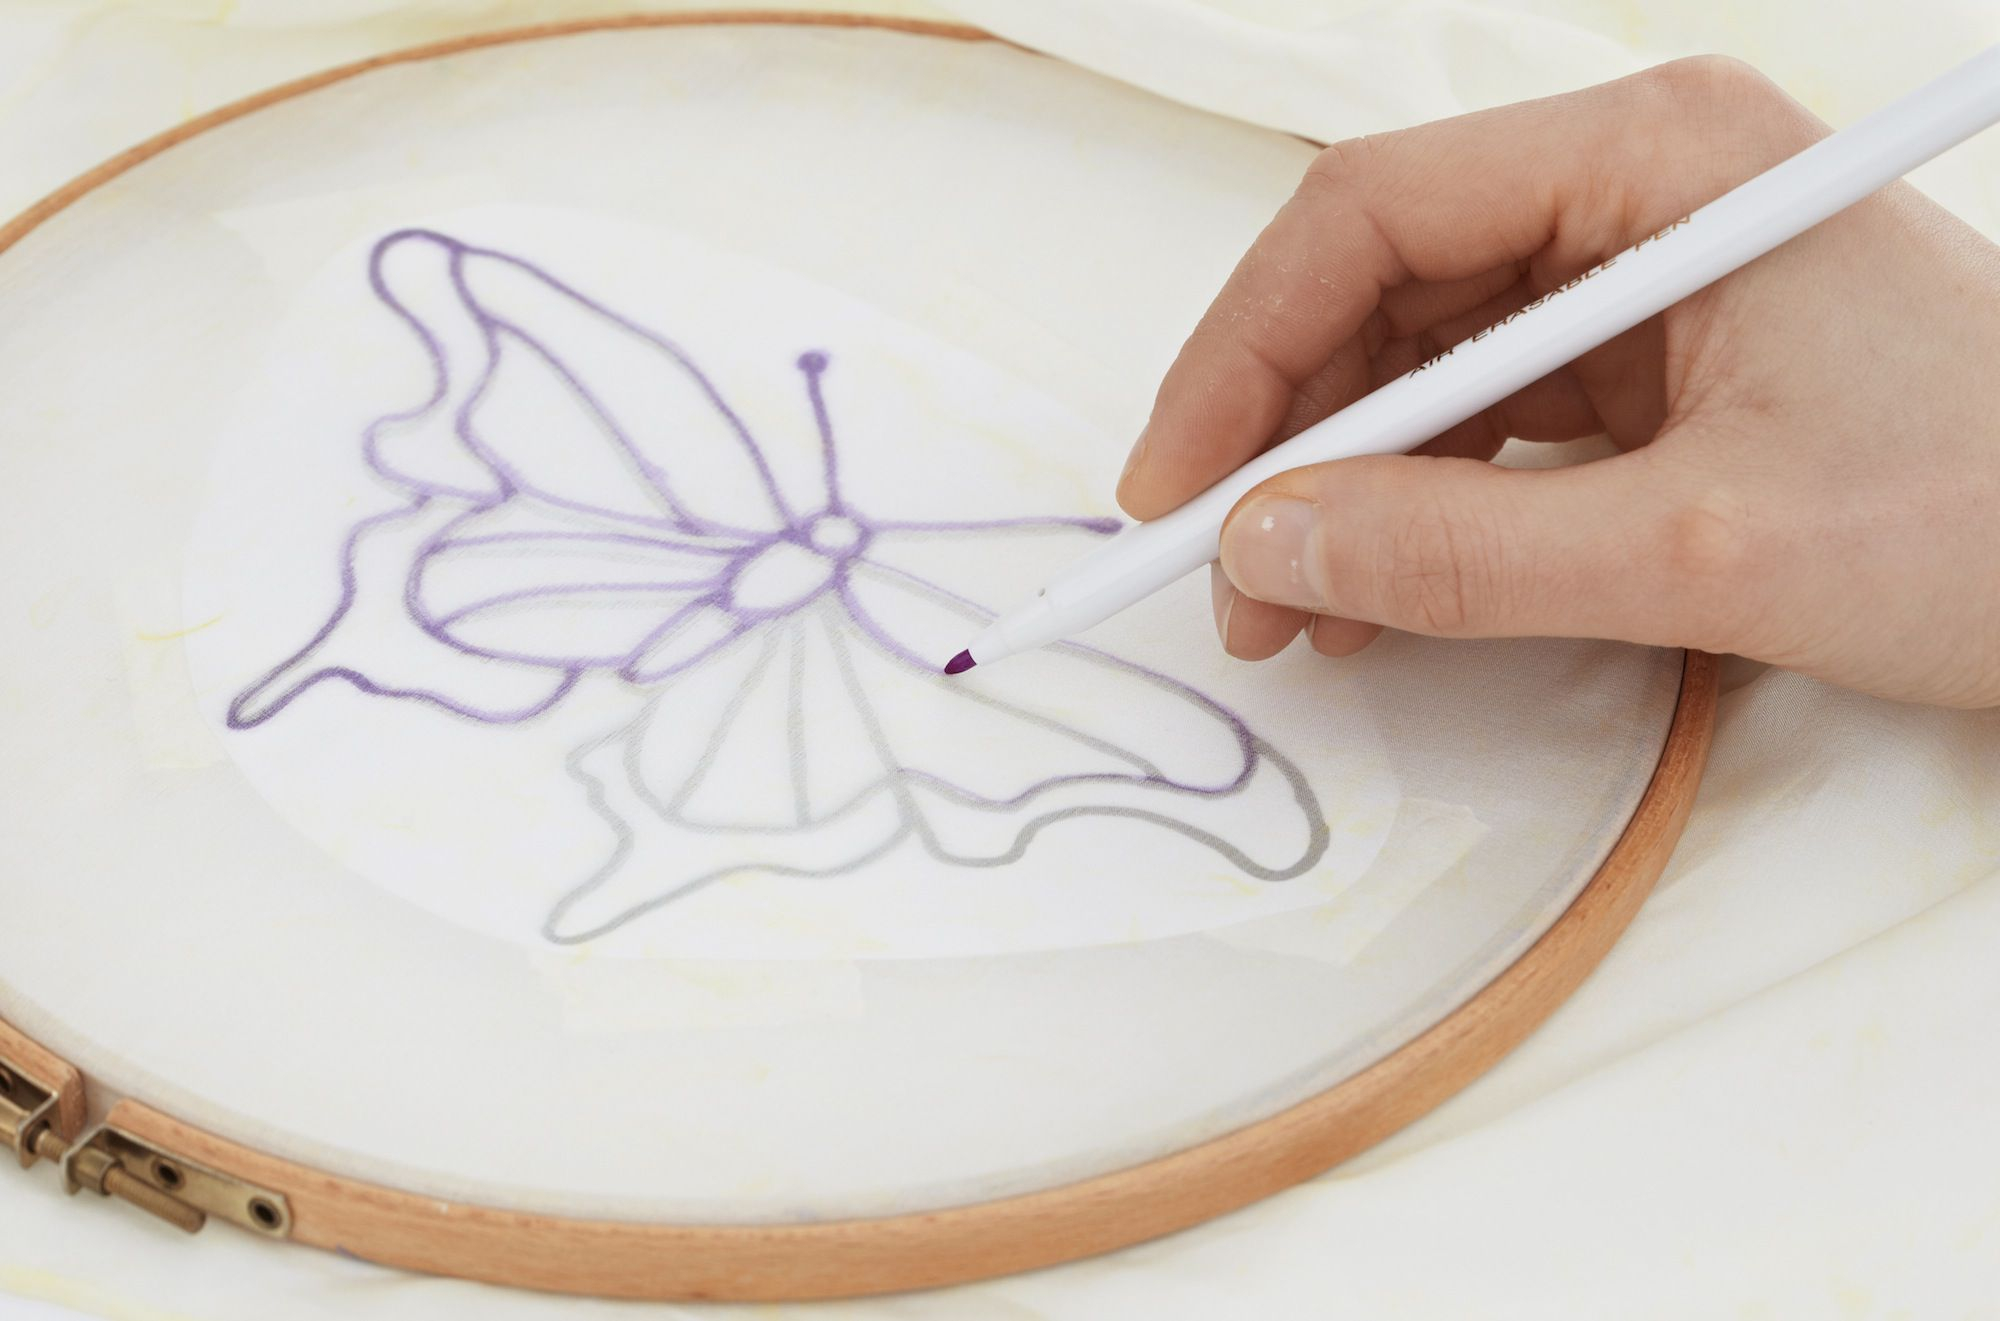 Iron On Patterns For Embroidery 7 Methods For Marking Or Transferring Embroidery Patterns